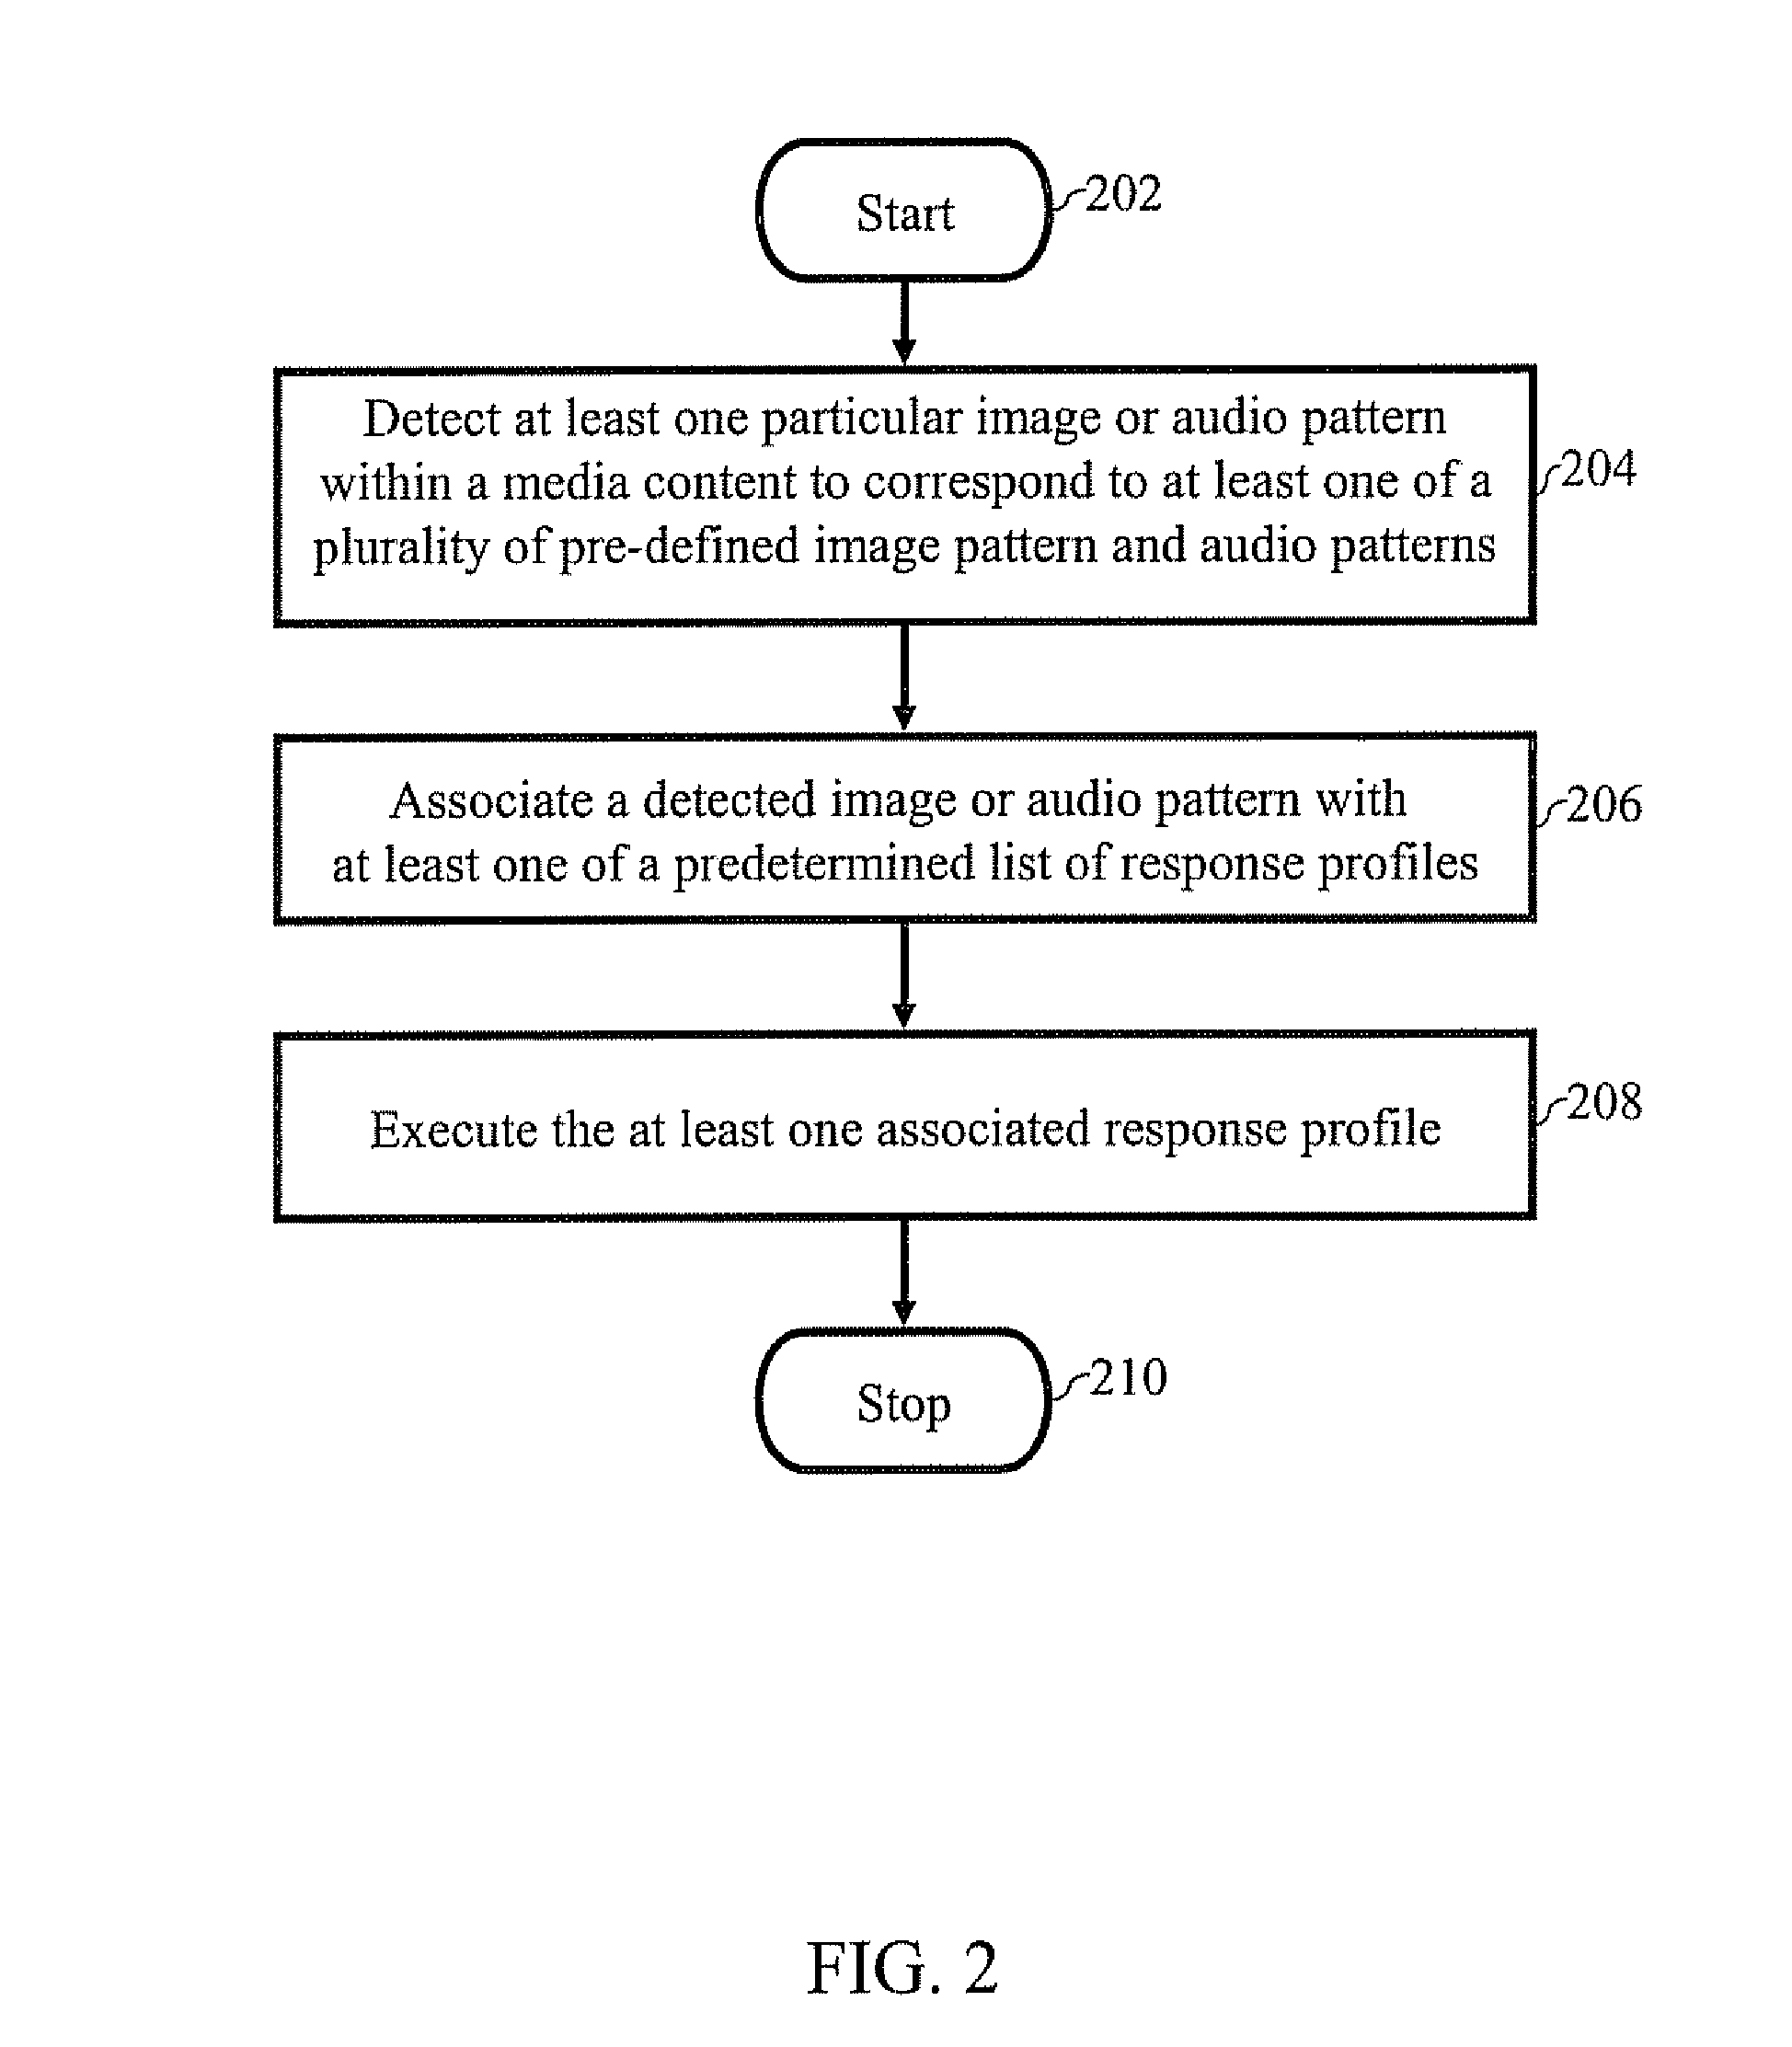 Method and System for Acquiring Information on the Basis of Media Content